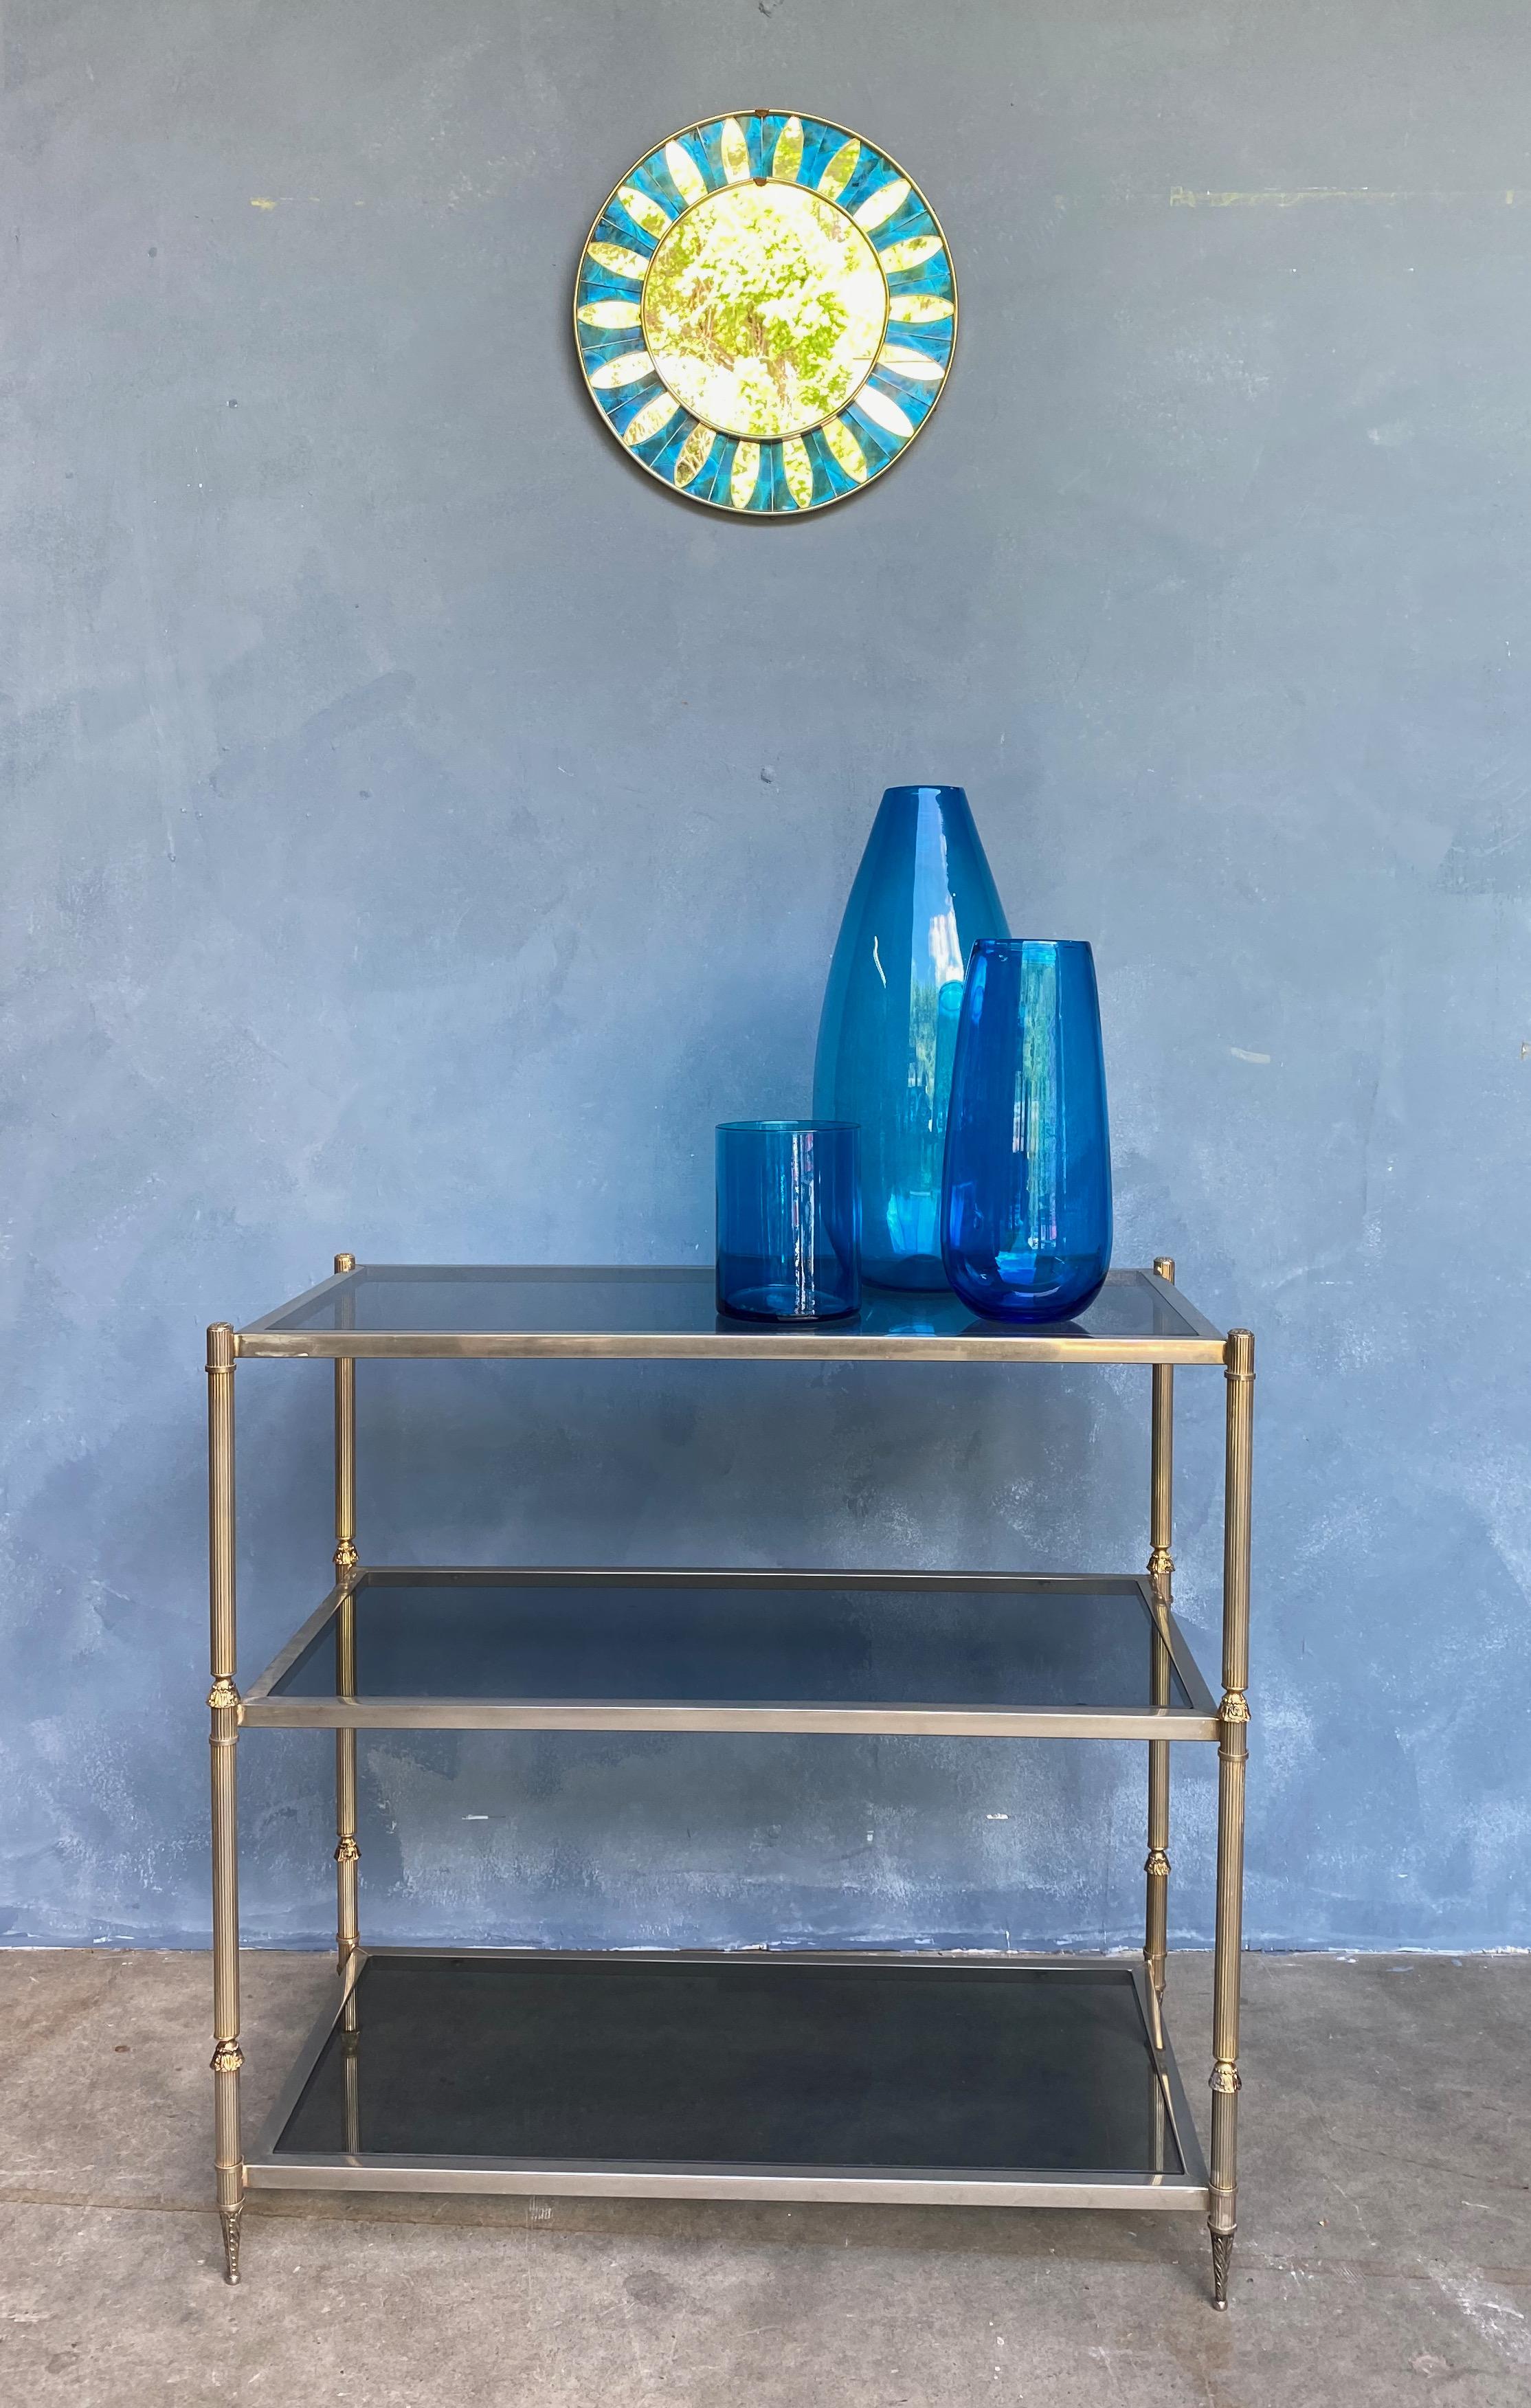 This handsome French brass and glass 3 tiered console hails from the 1970’s. It features three smoked glass shelves enclosed in a patinated silvered brass frame, with fluted brass legs and classical motifs providing an elegant touch. The vintage